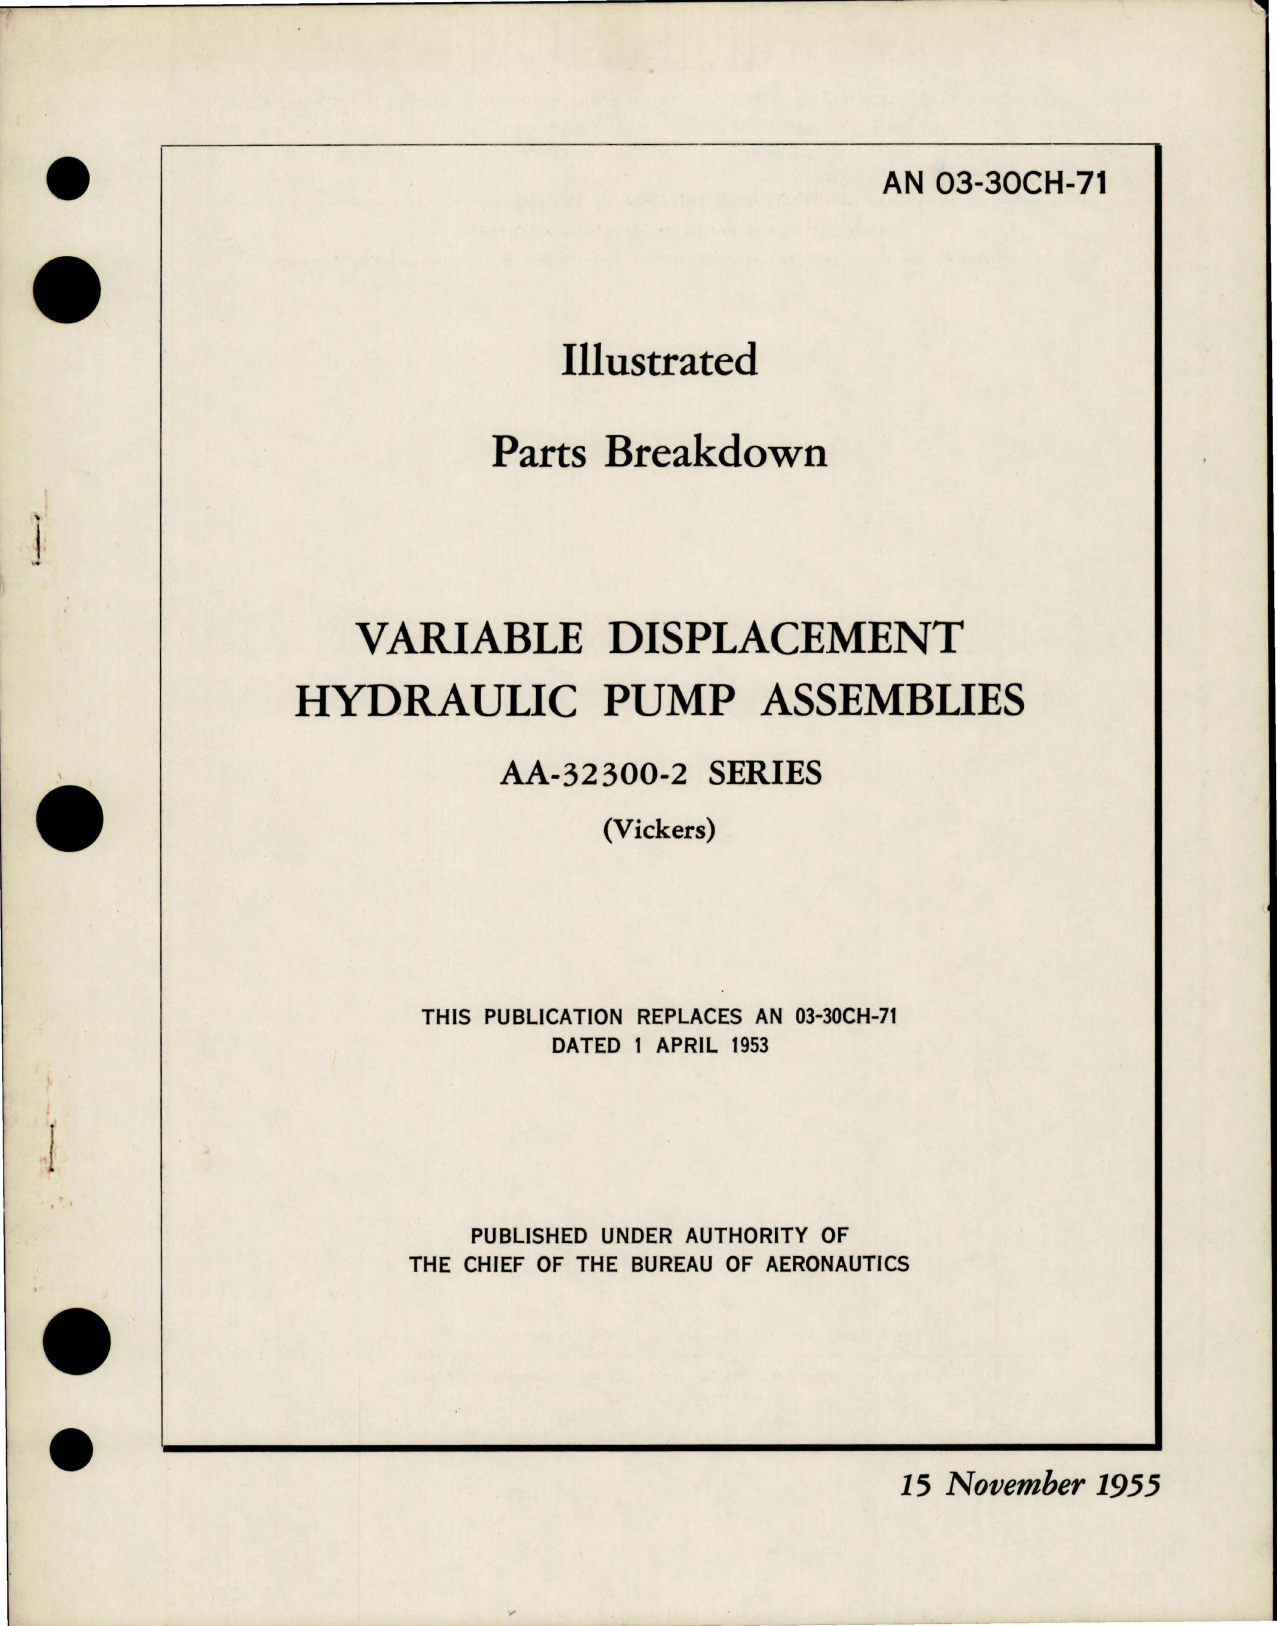 Sample page 1 from AirCorps Library document: Illustrated Parts Breakdown for Variable Displacement Hydraulic Pump Assemblies - AA-32300-2 Series 